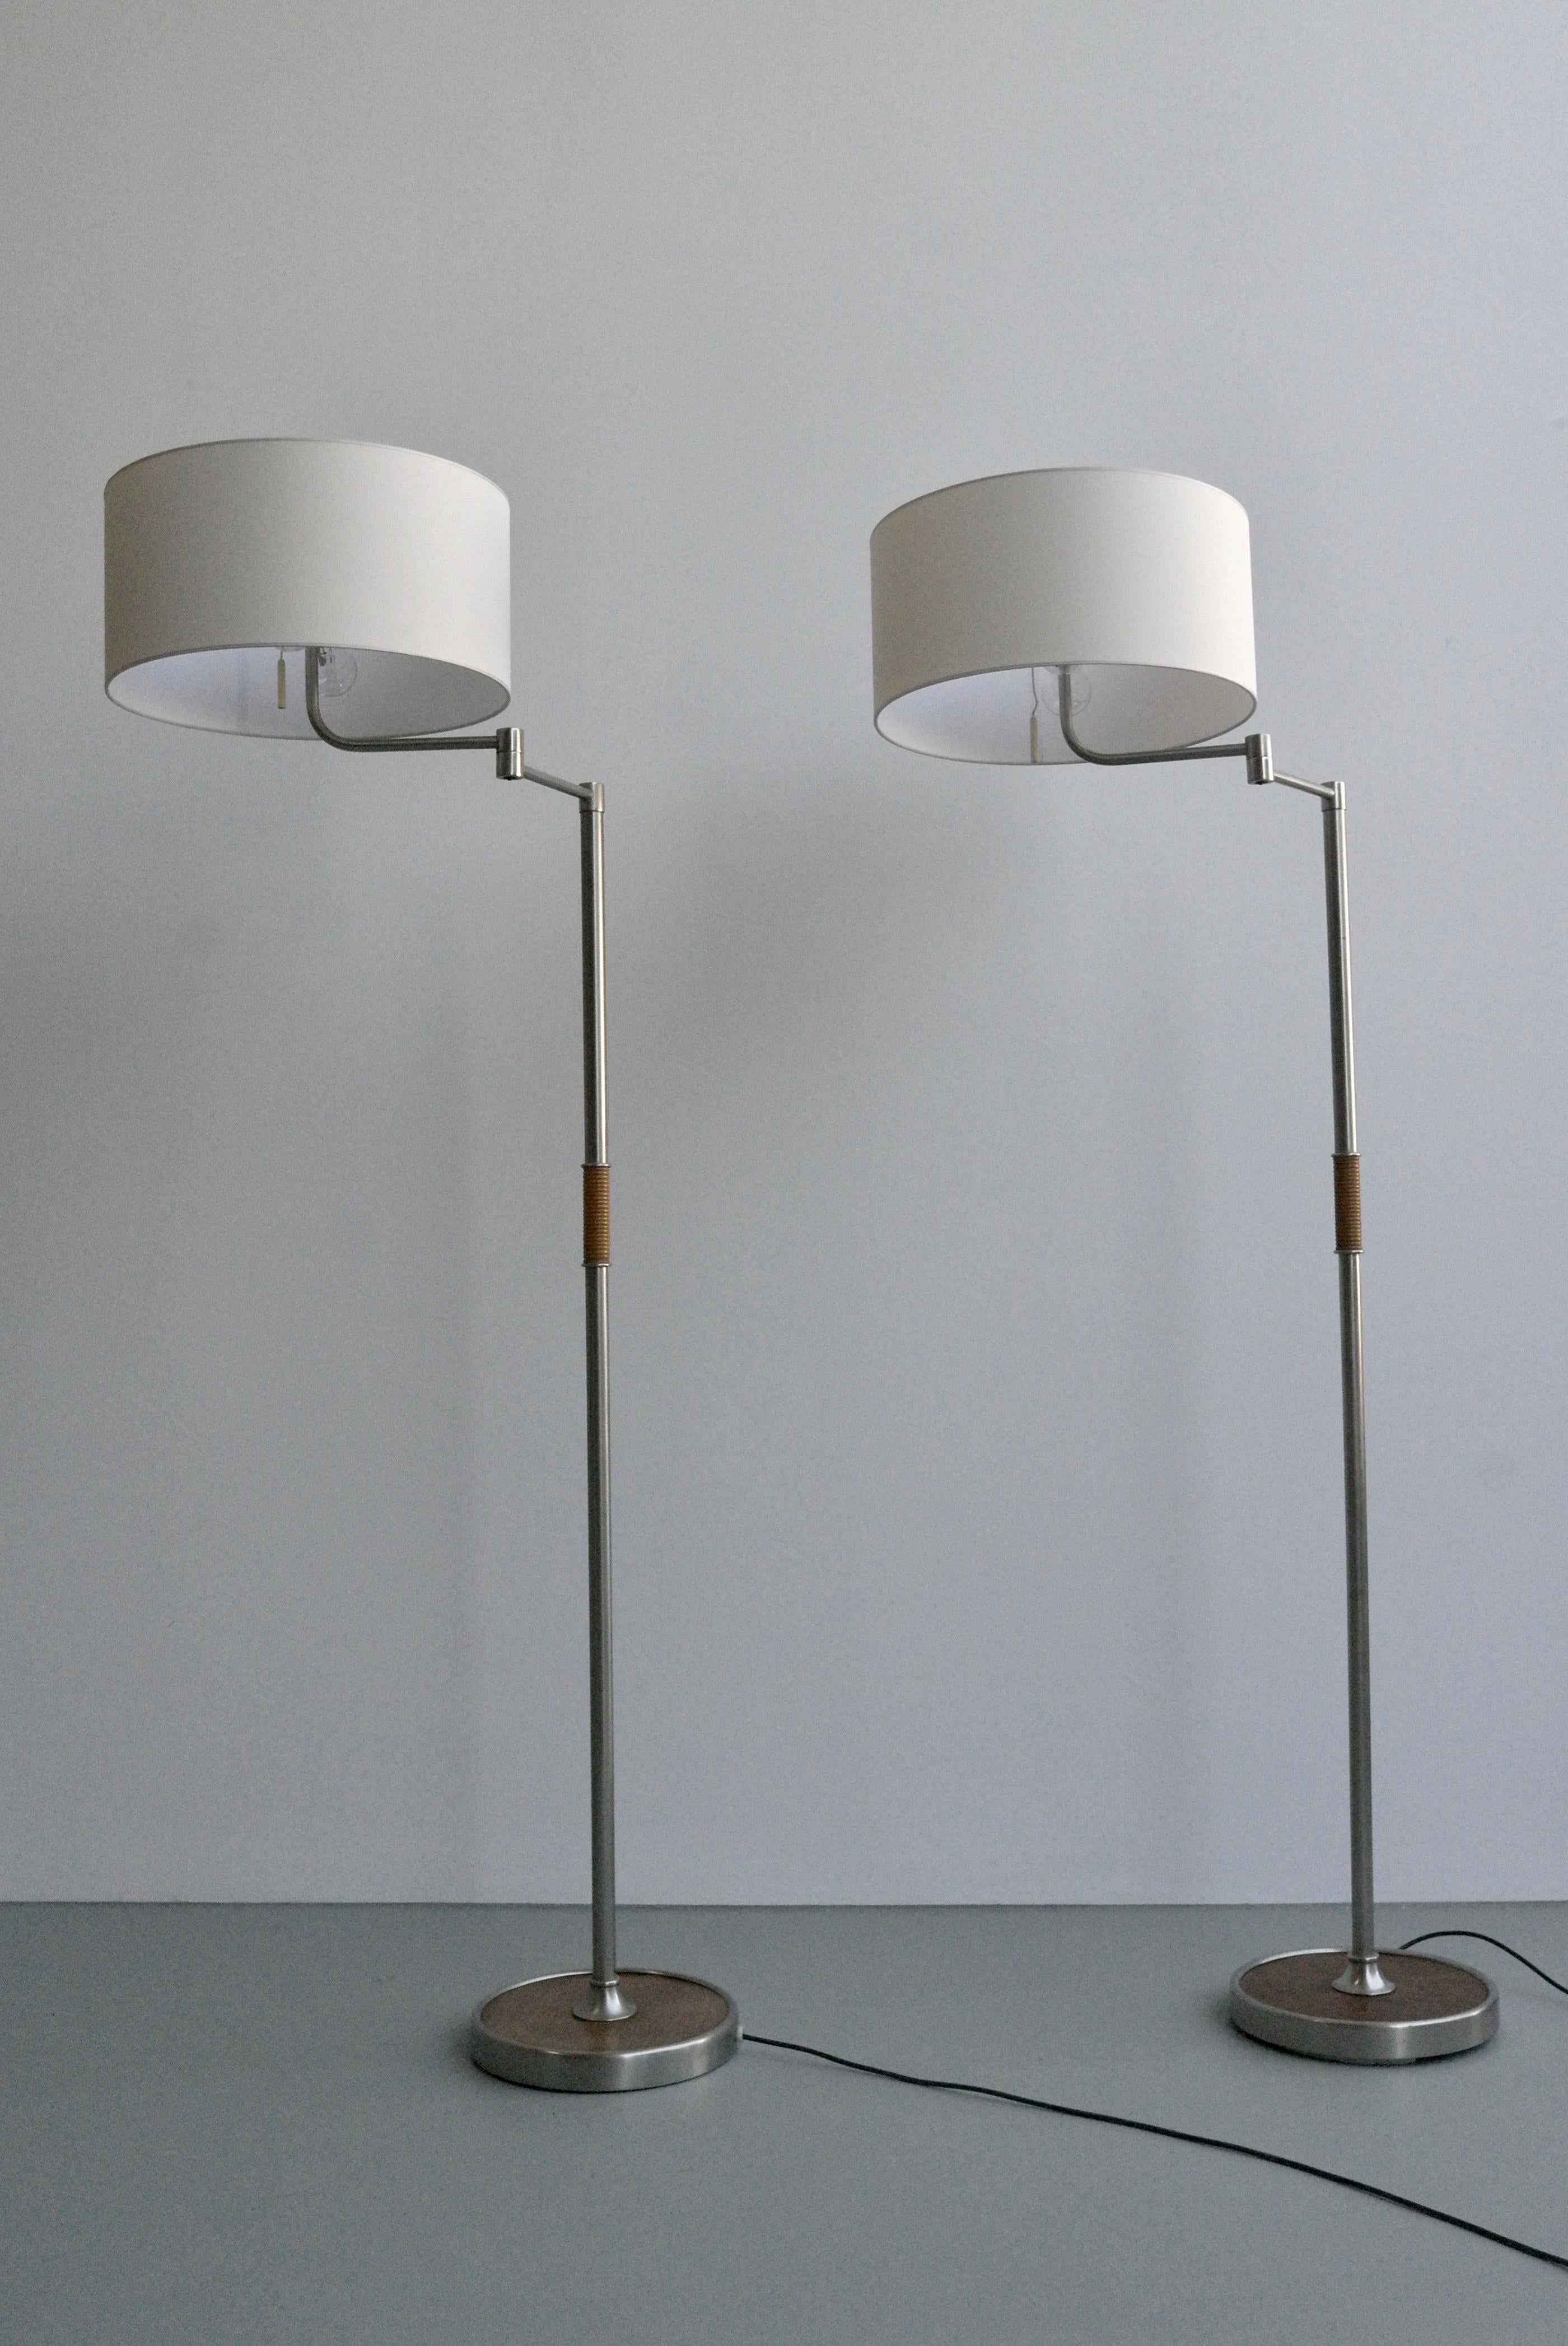 Pair of Midcentury Swing-Arm Floor Lamps in Metal with Faux Bamboo Wood Details In Good Condition For Sale In Den Haag, NL